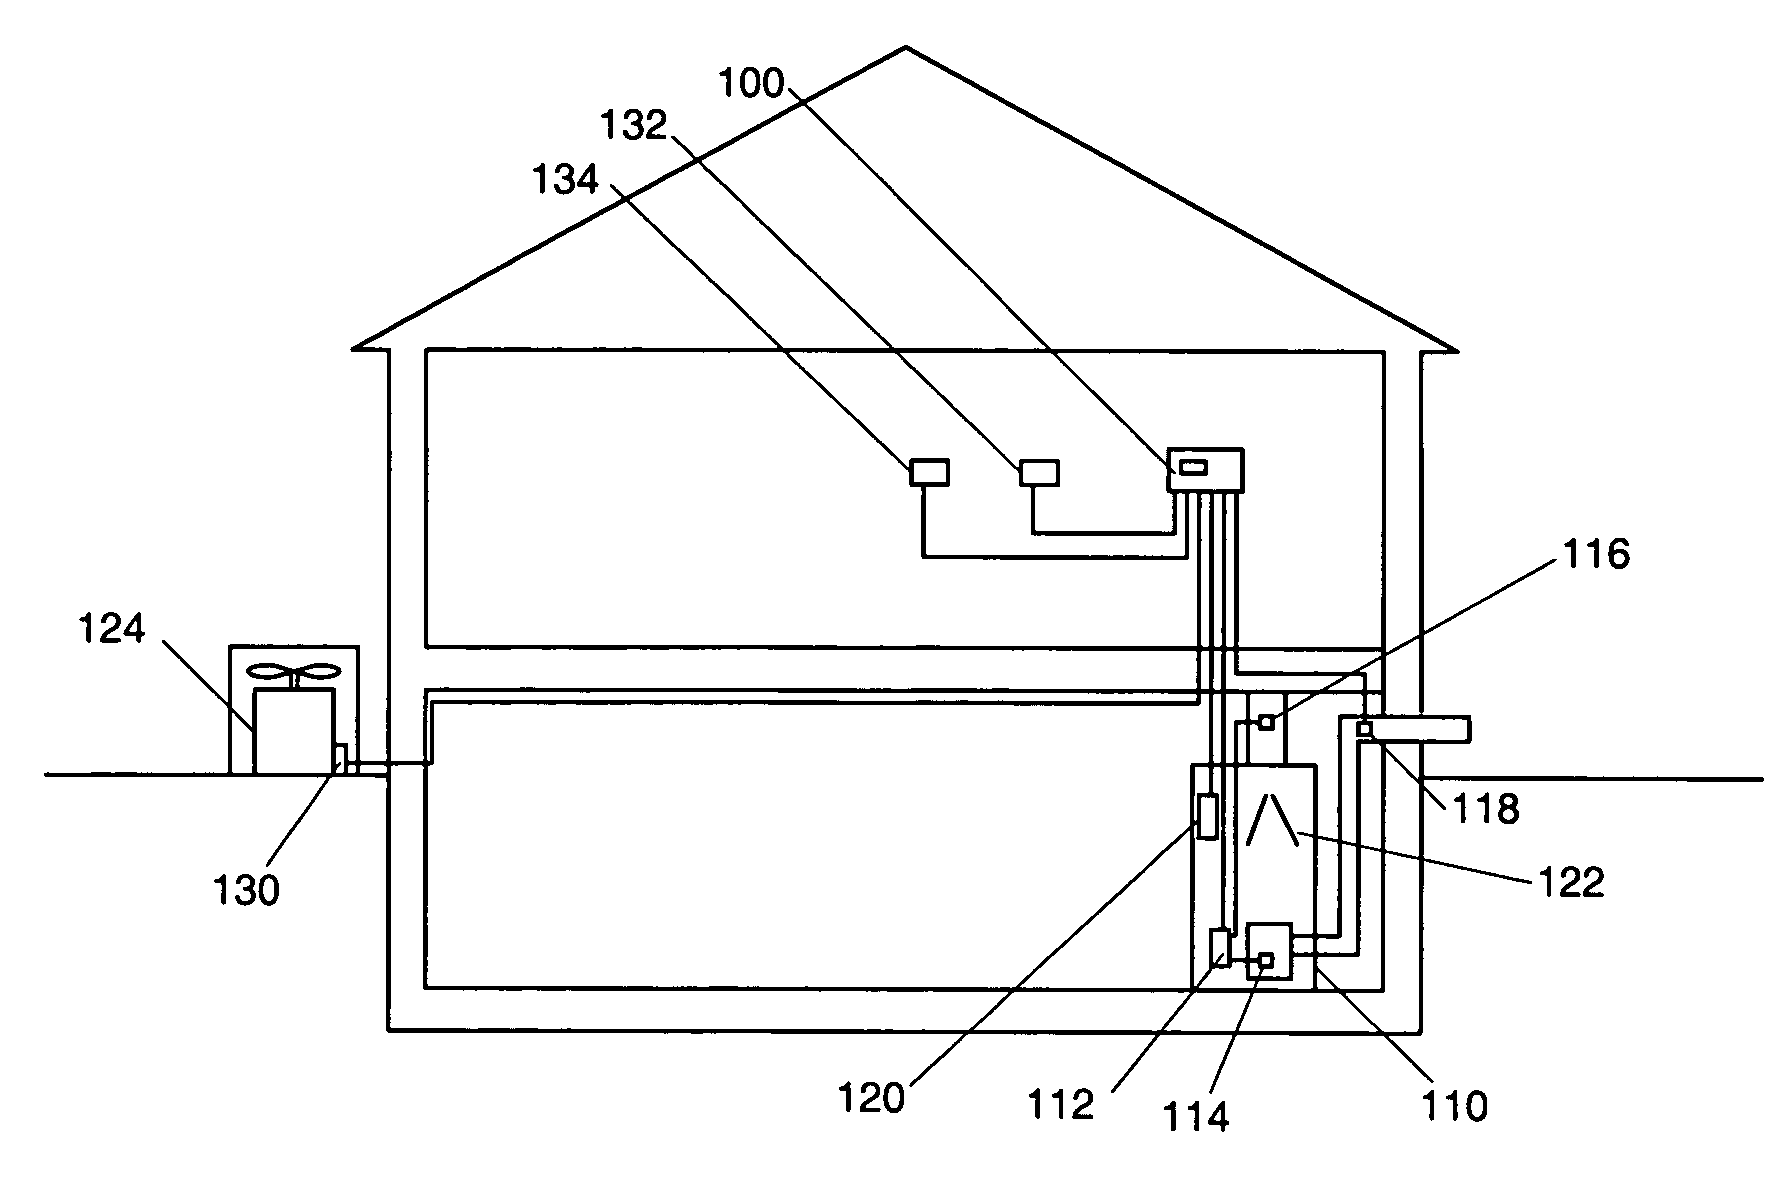 Thermostat responsive to inputs from external devices